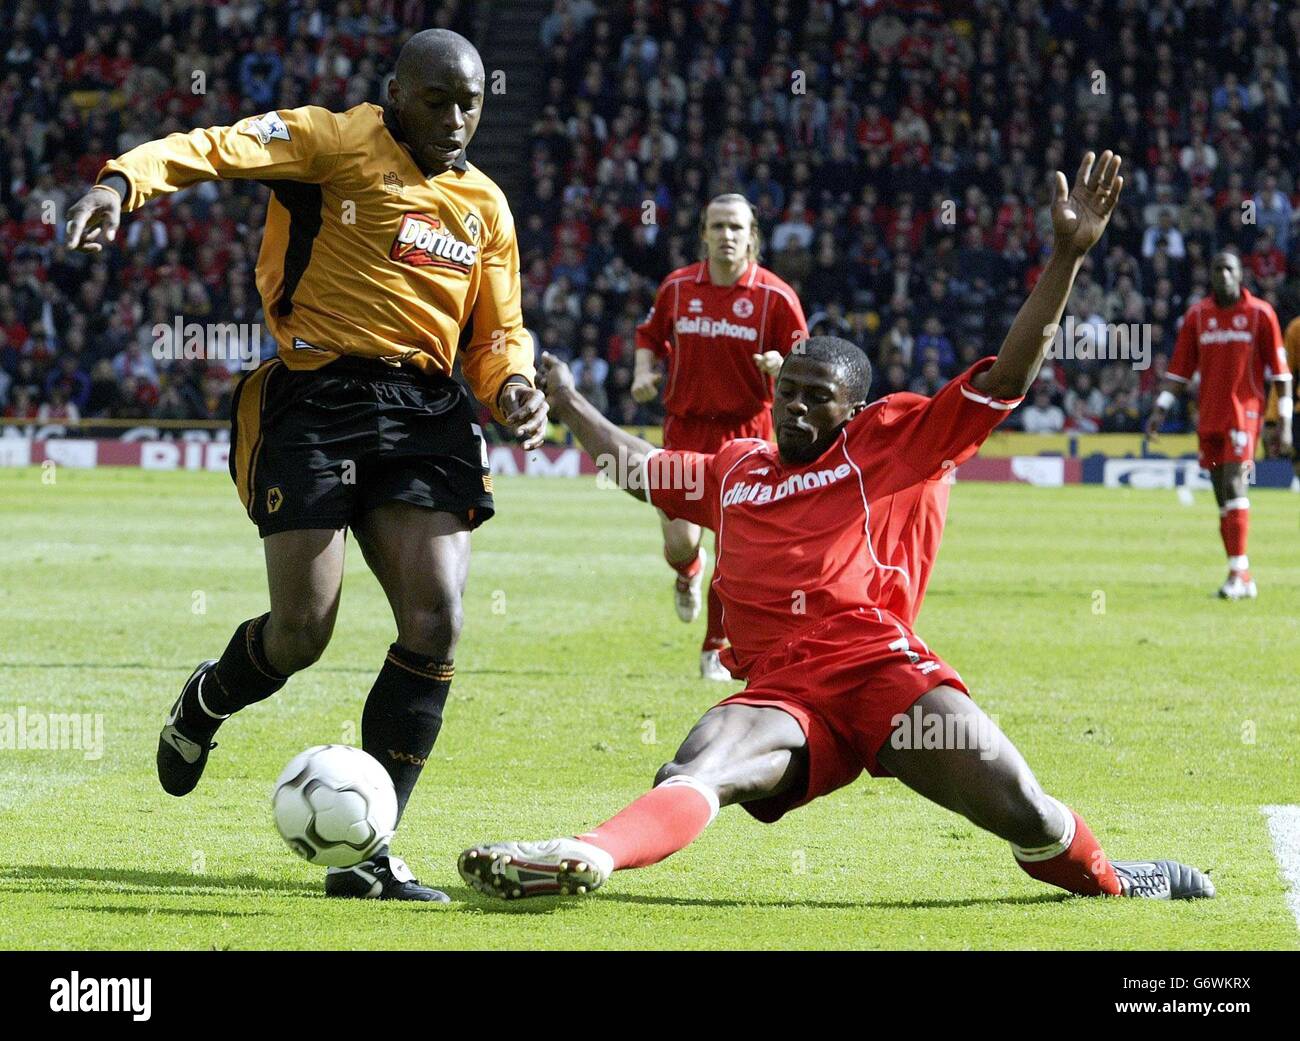 Shaun Newton (left) of Wolverhampton Wanderers avoids a tackle from Middlesbrough's George Boateng, during their Barclaycard Premiership match at Wolverhampton Wanderers Molineux Ground, Wolverhampton. Final score: Wolverhampton Wanderers 2, Middlesbrough nil. Stock Photo